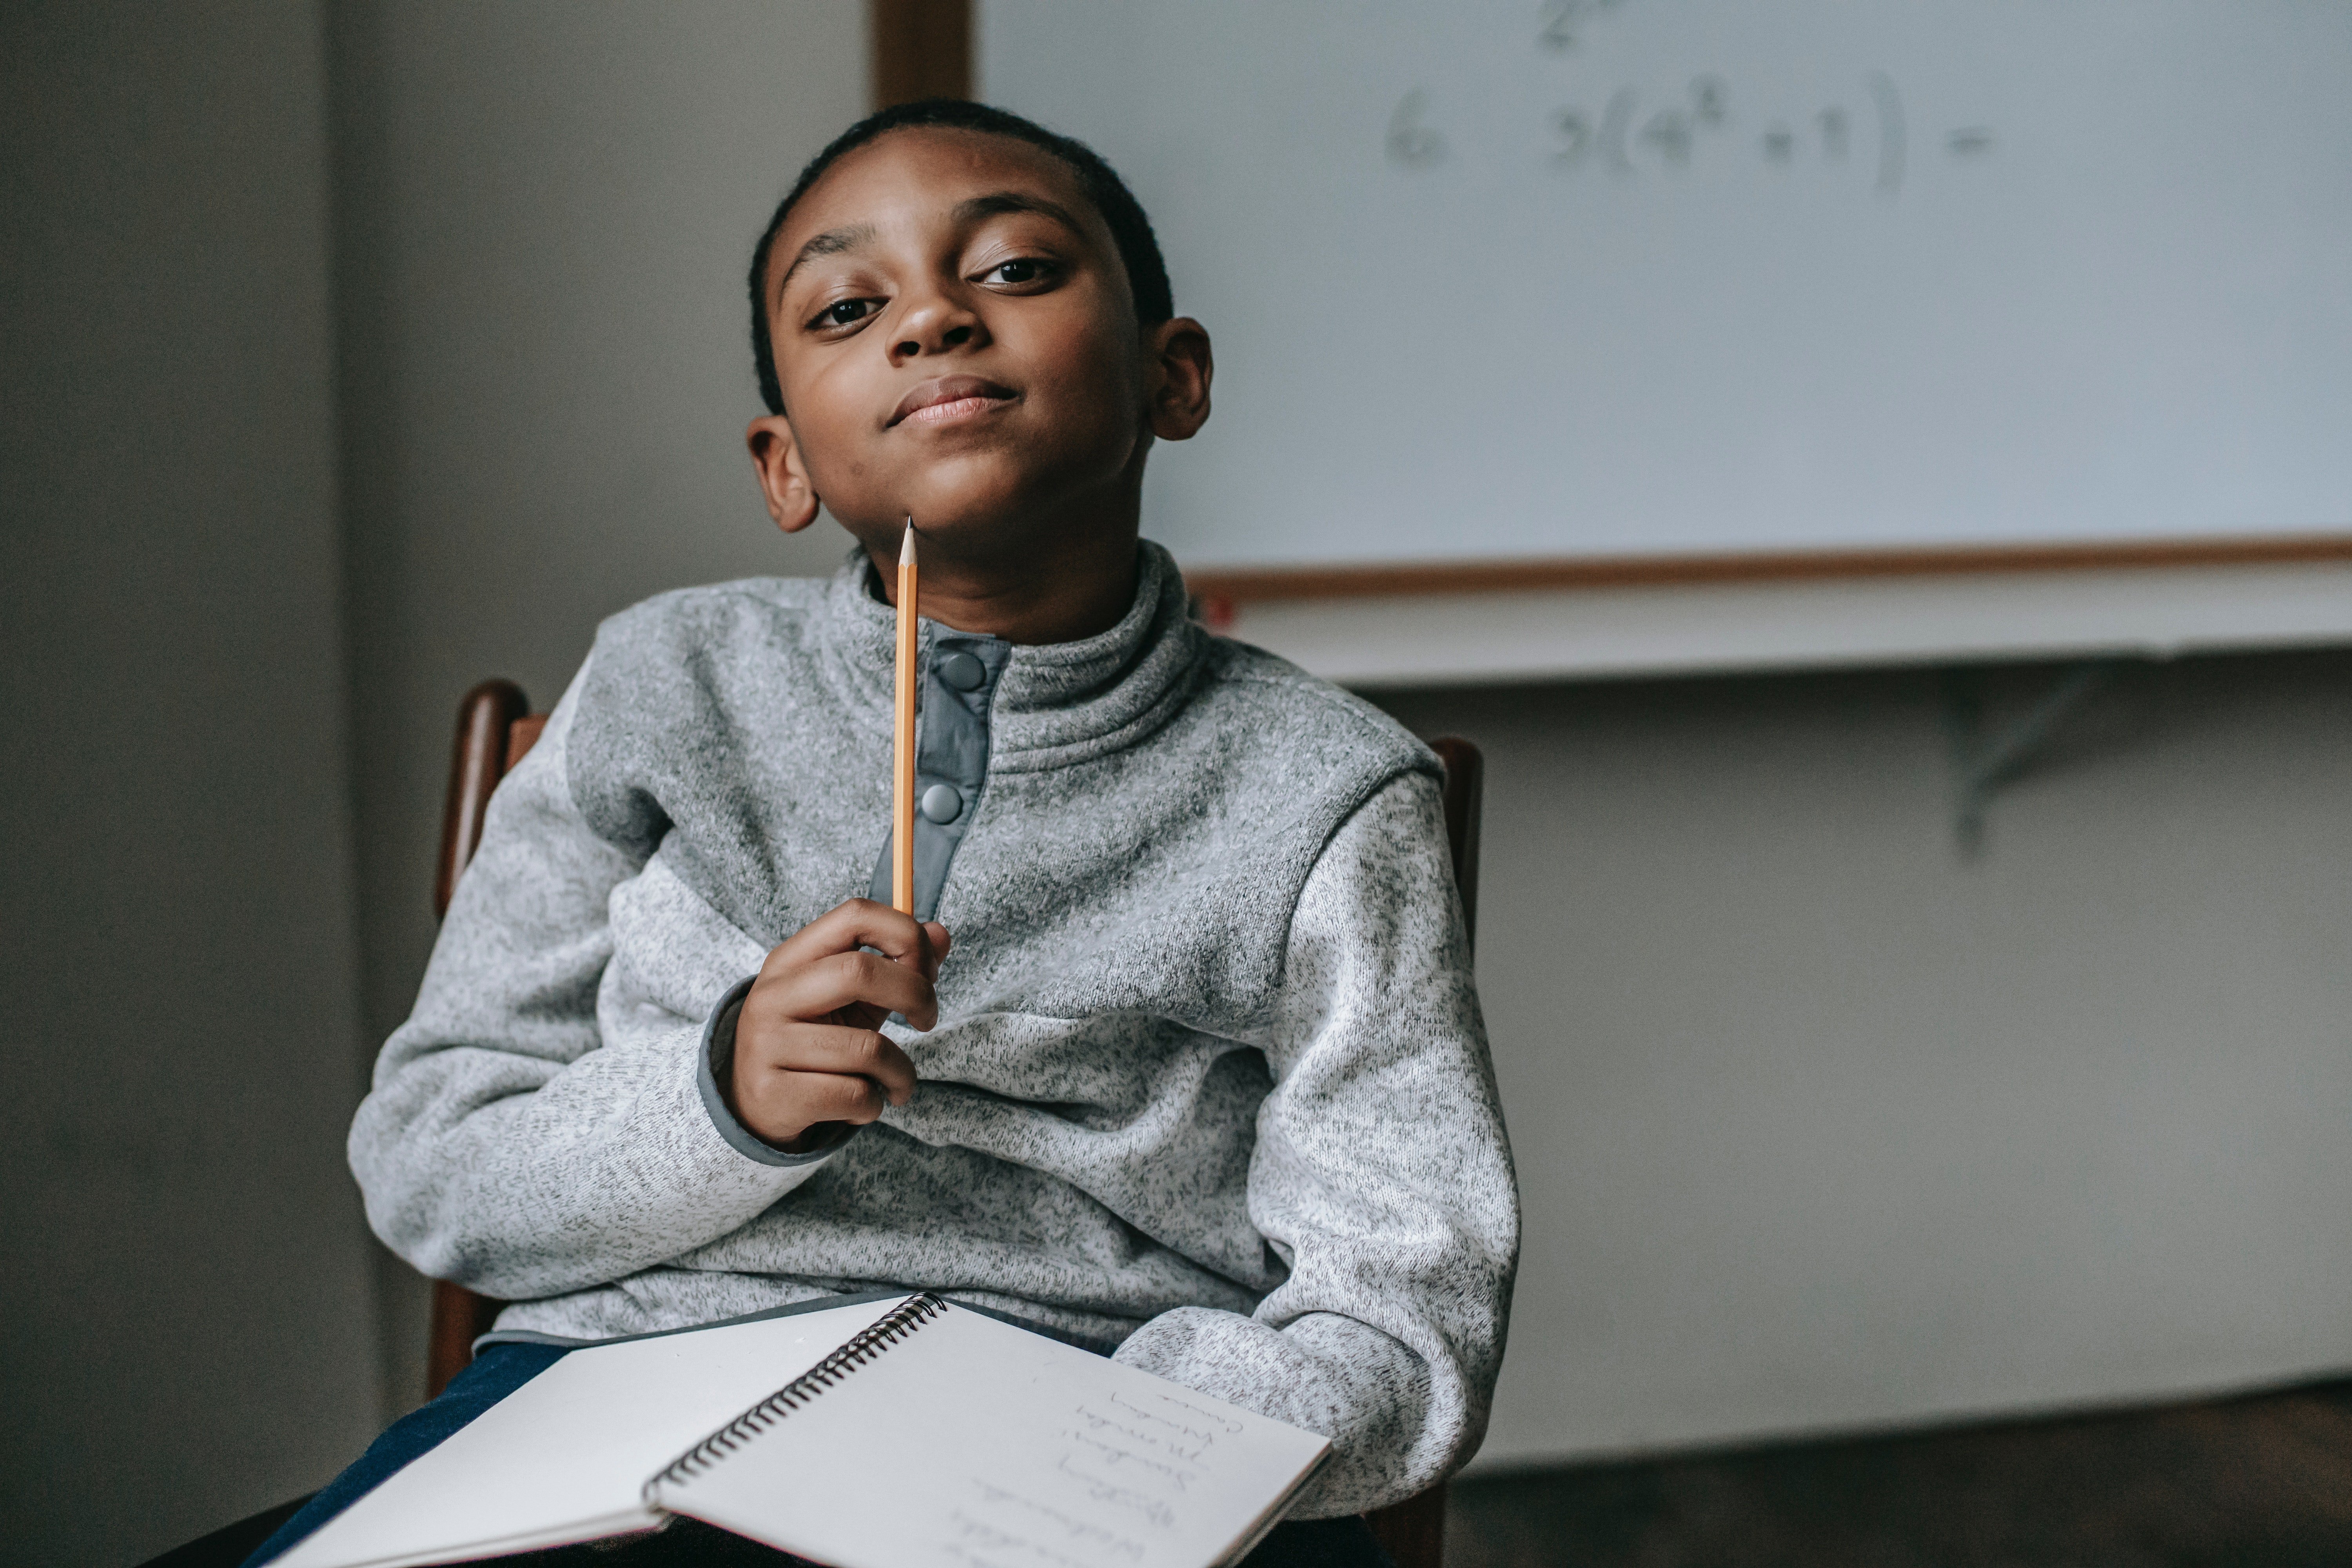 A thoughtful school kid sitting on a chair. | Photo: Pexels/Katerina Holmes